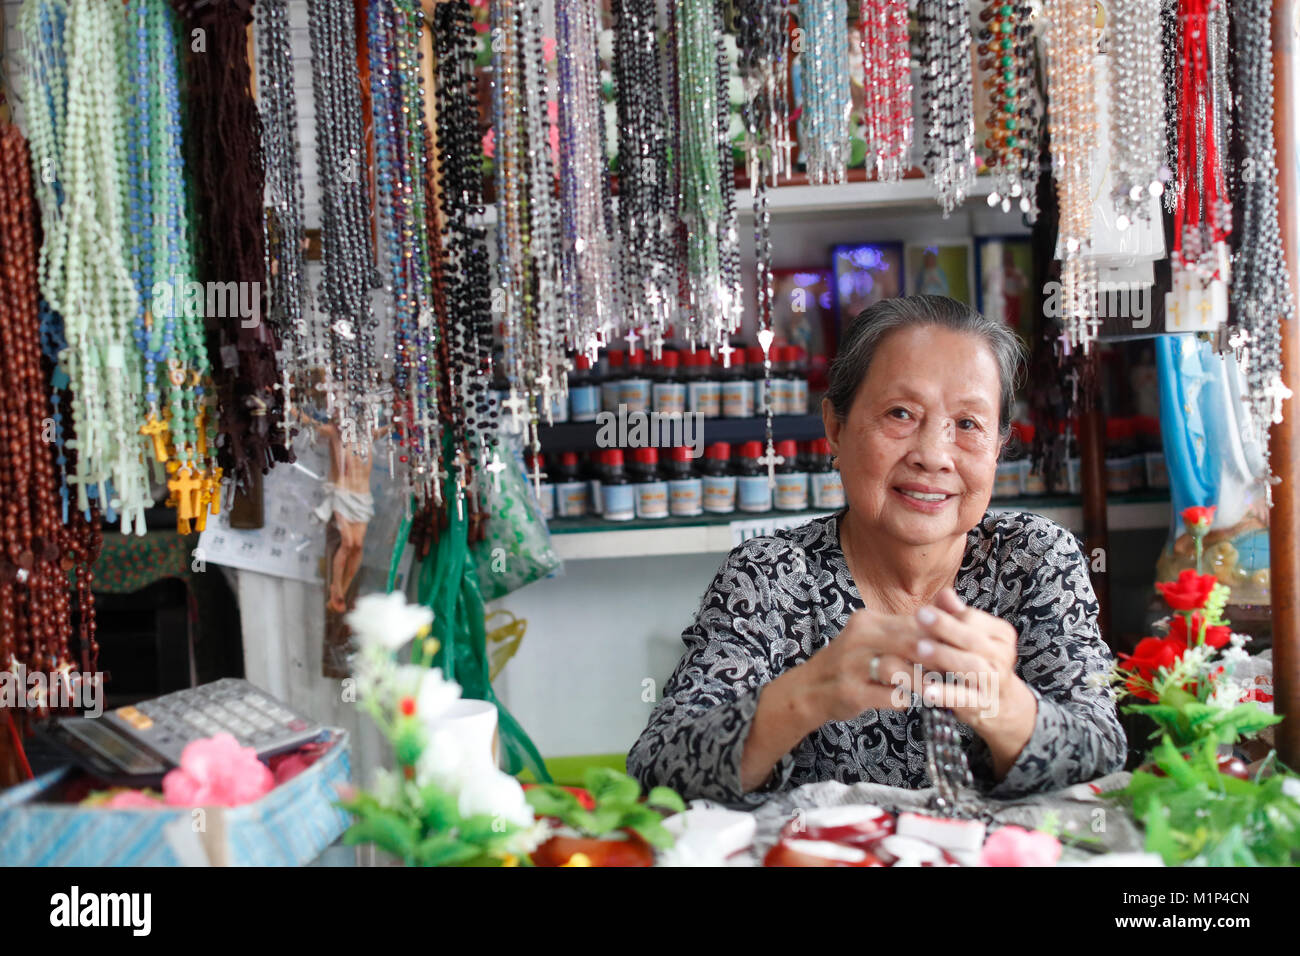 Shop selling religious Christian items including Rosary prayer beads, Ho Chi Minh City, Vietnam, Indochina, Southeast Asia, Asia Stock Photo